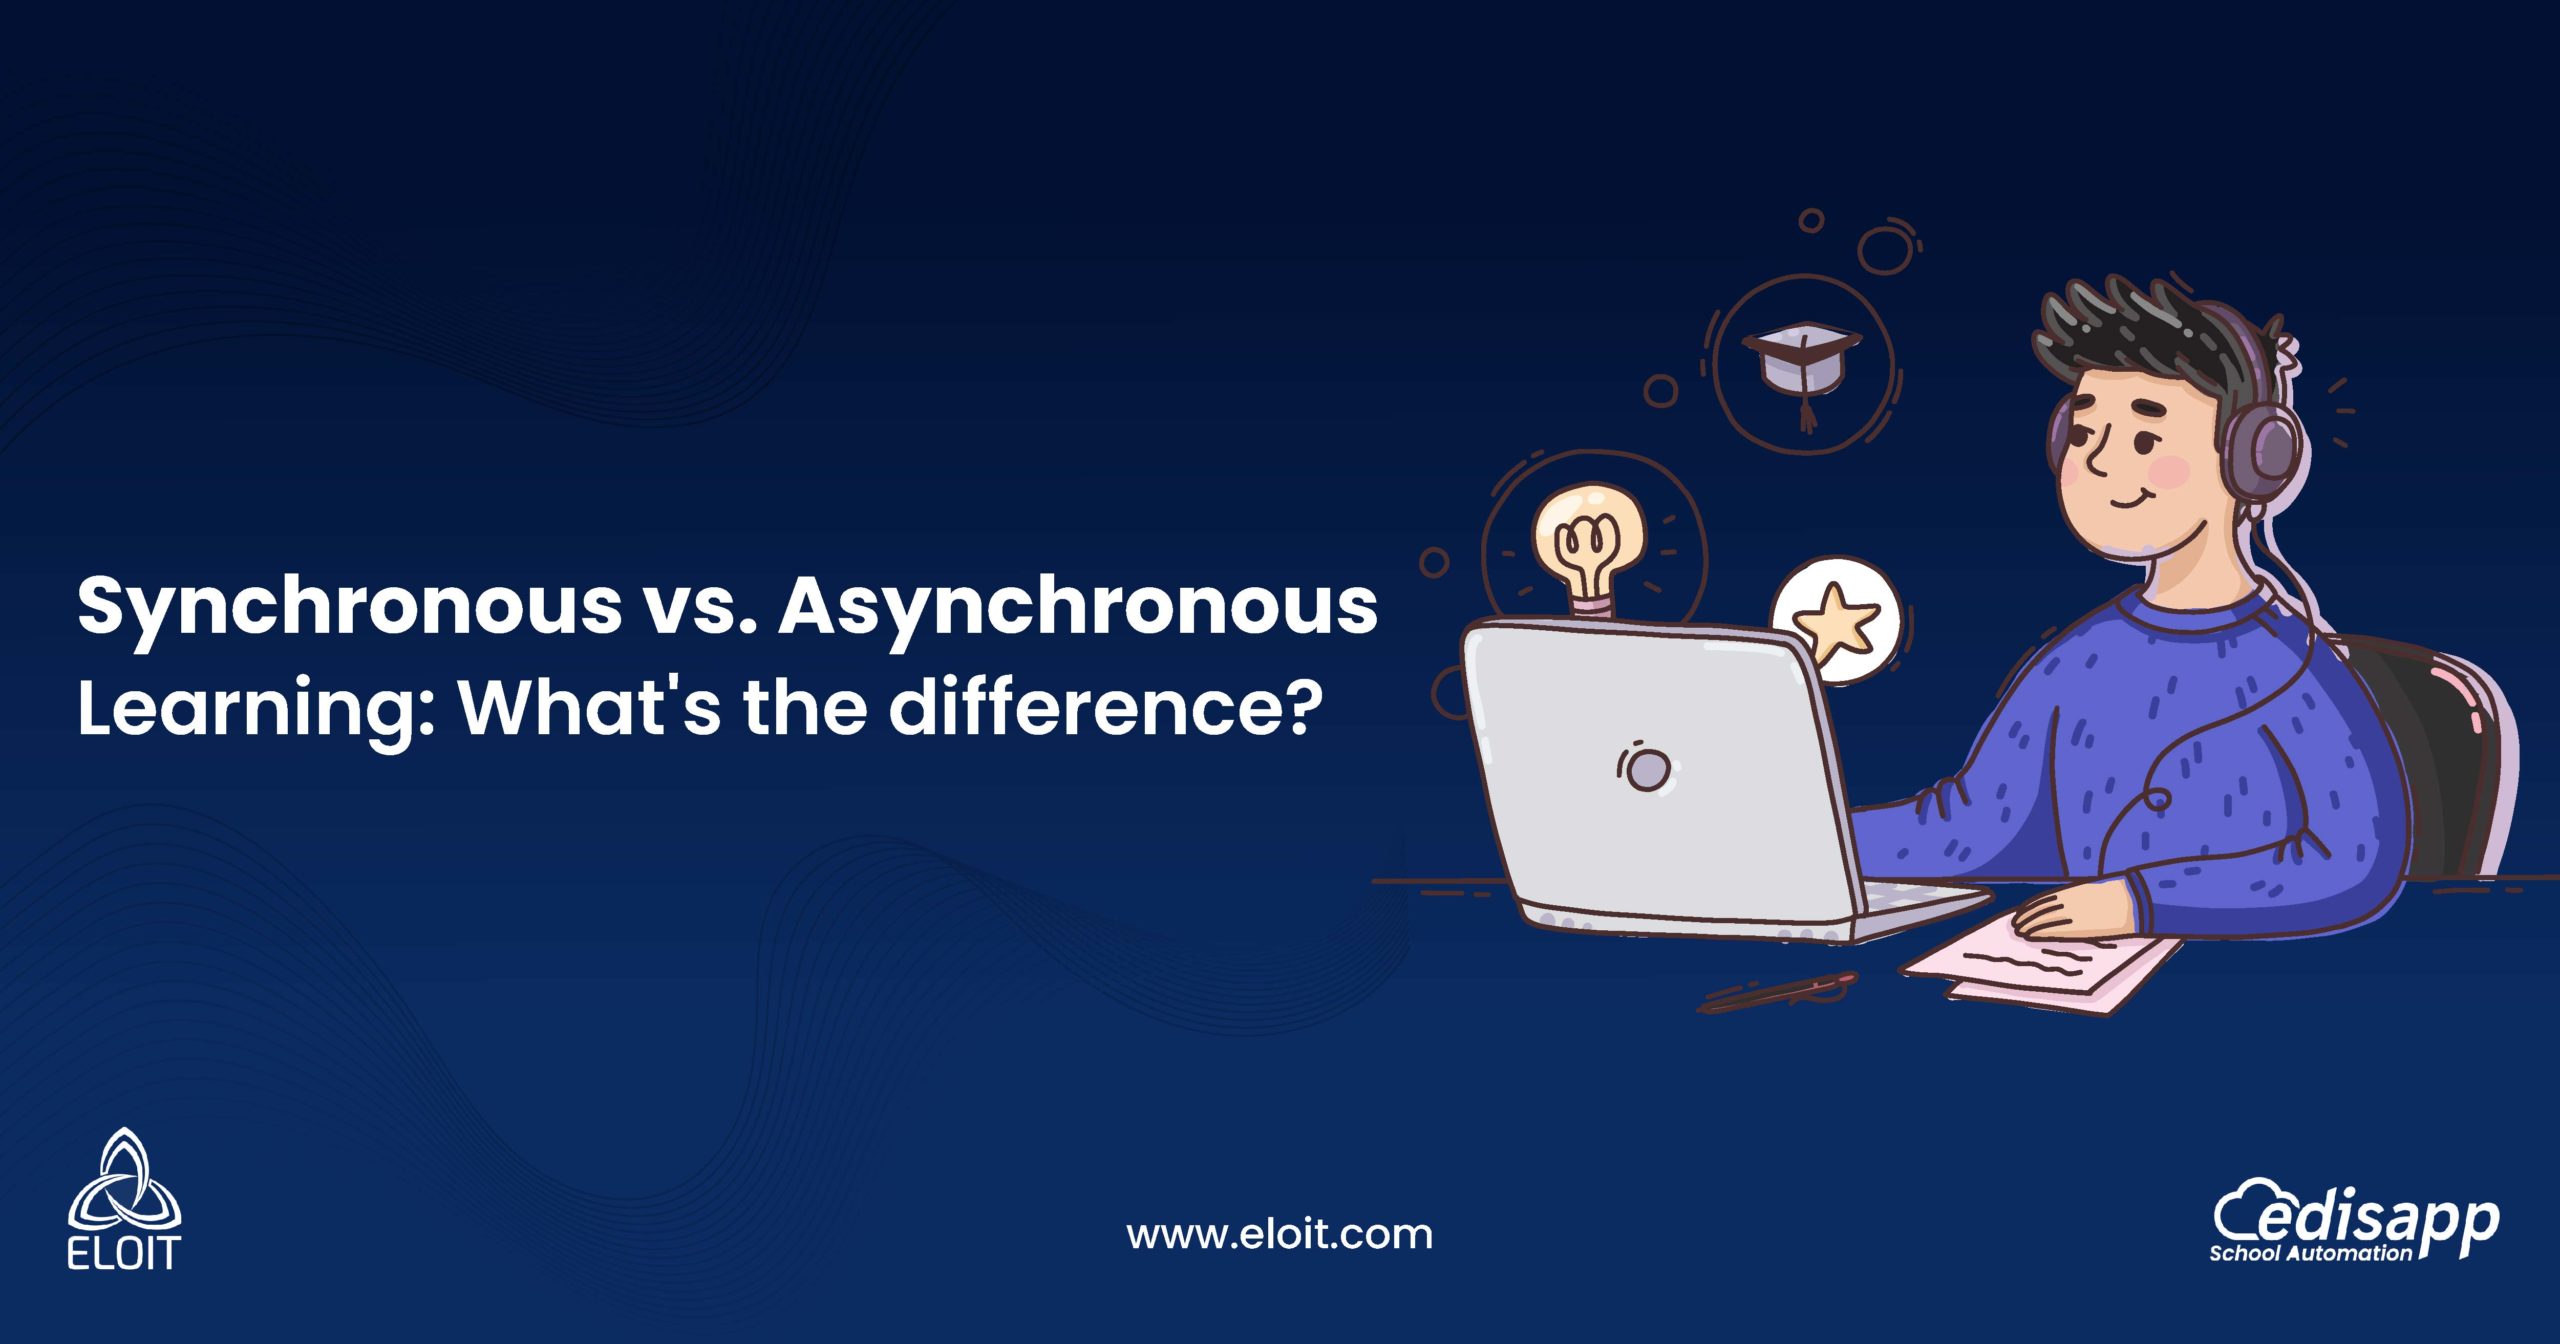 Synchronous vs. Asynchronous Learning: What’s the difference?